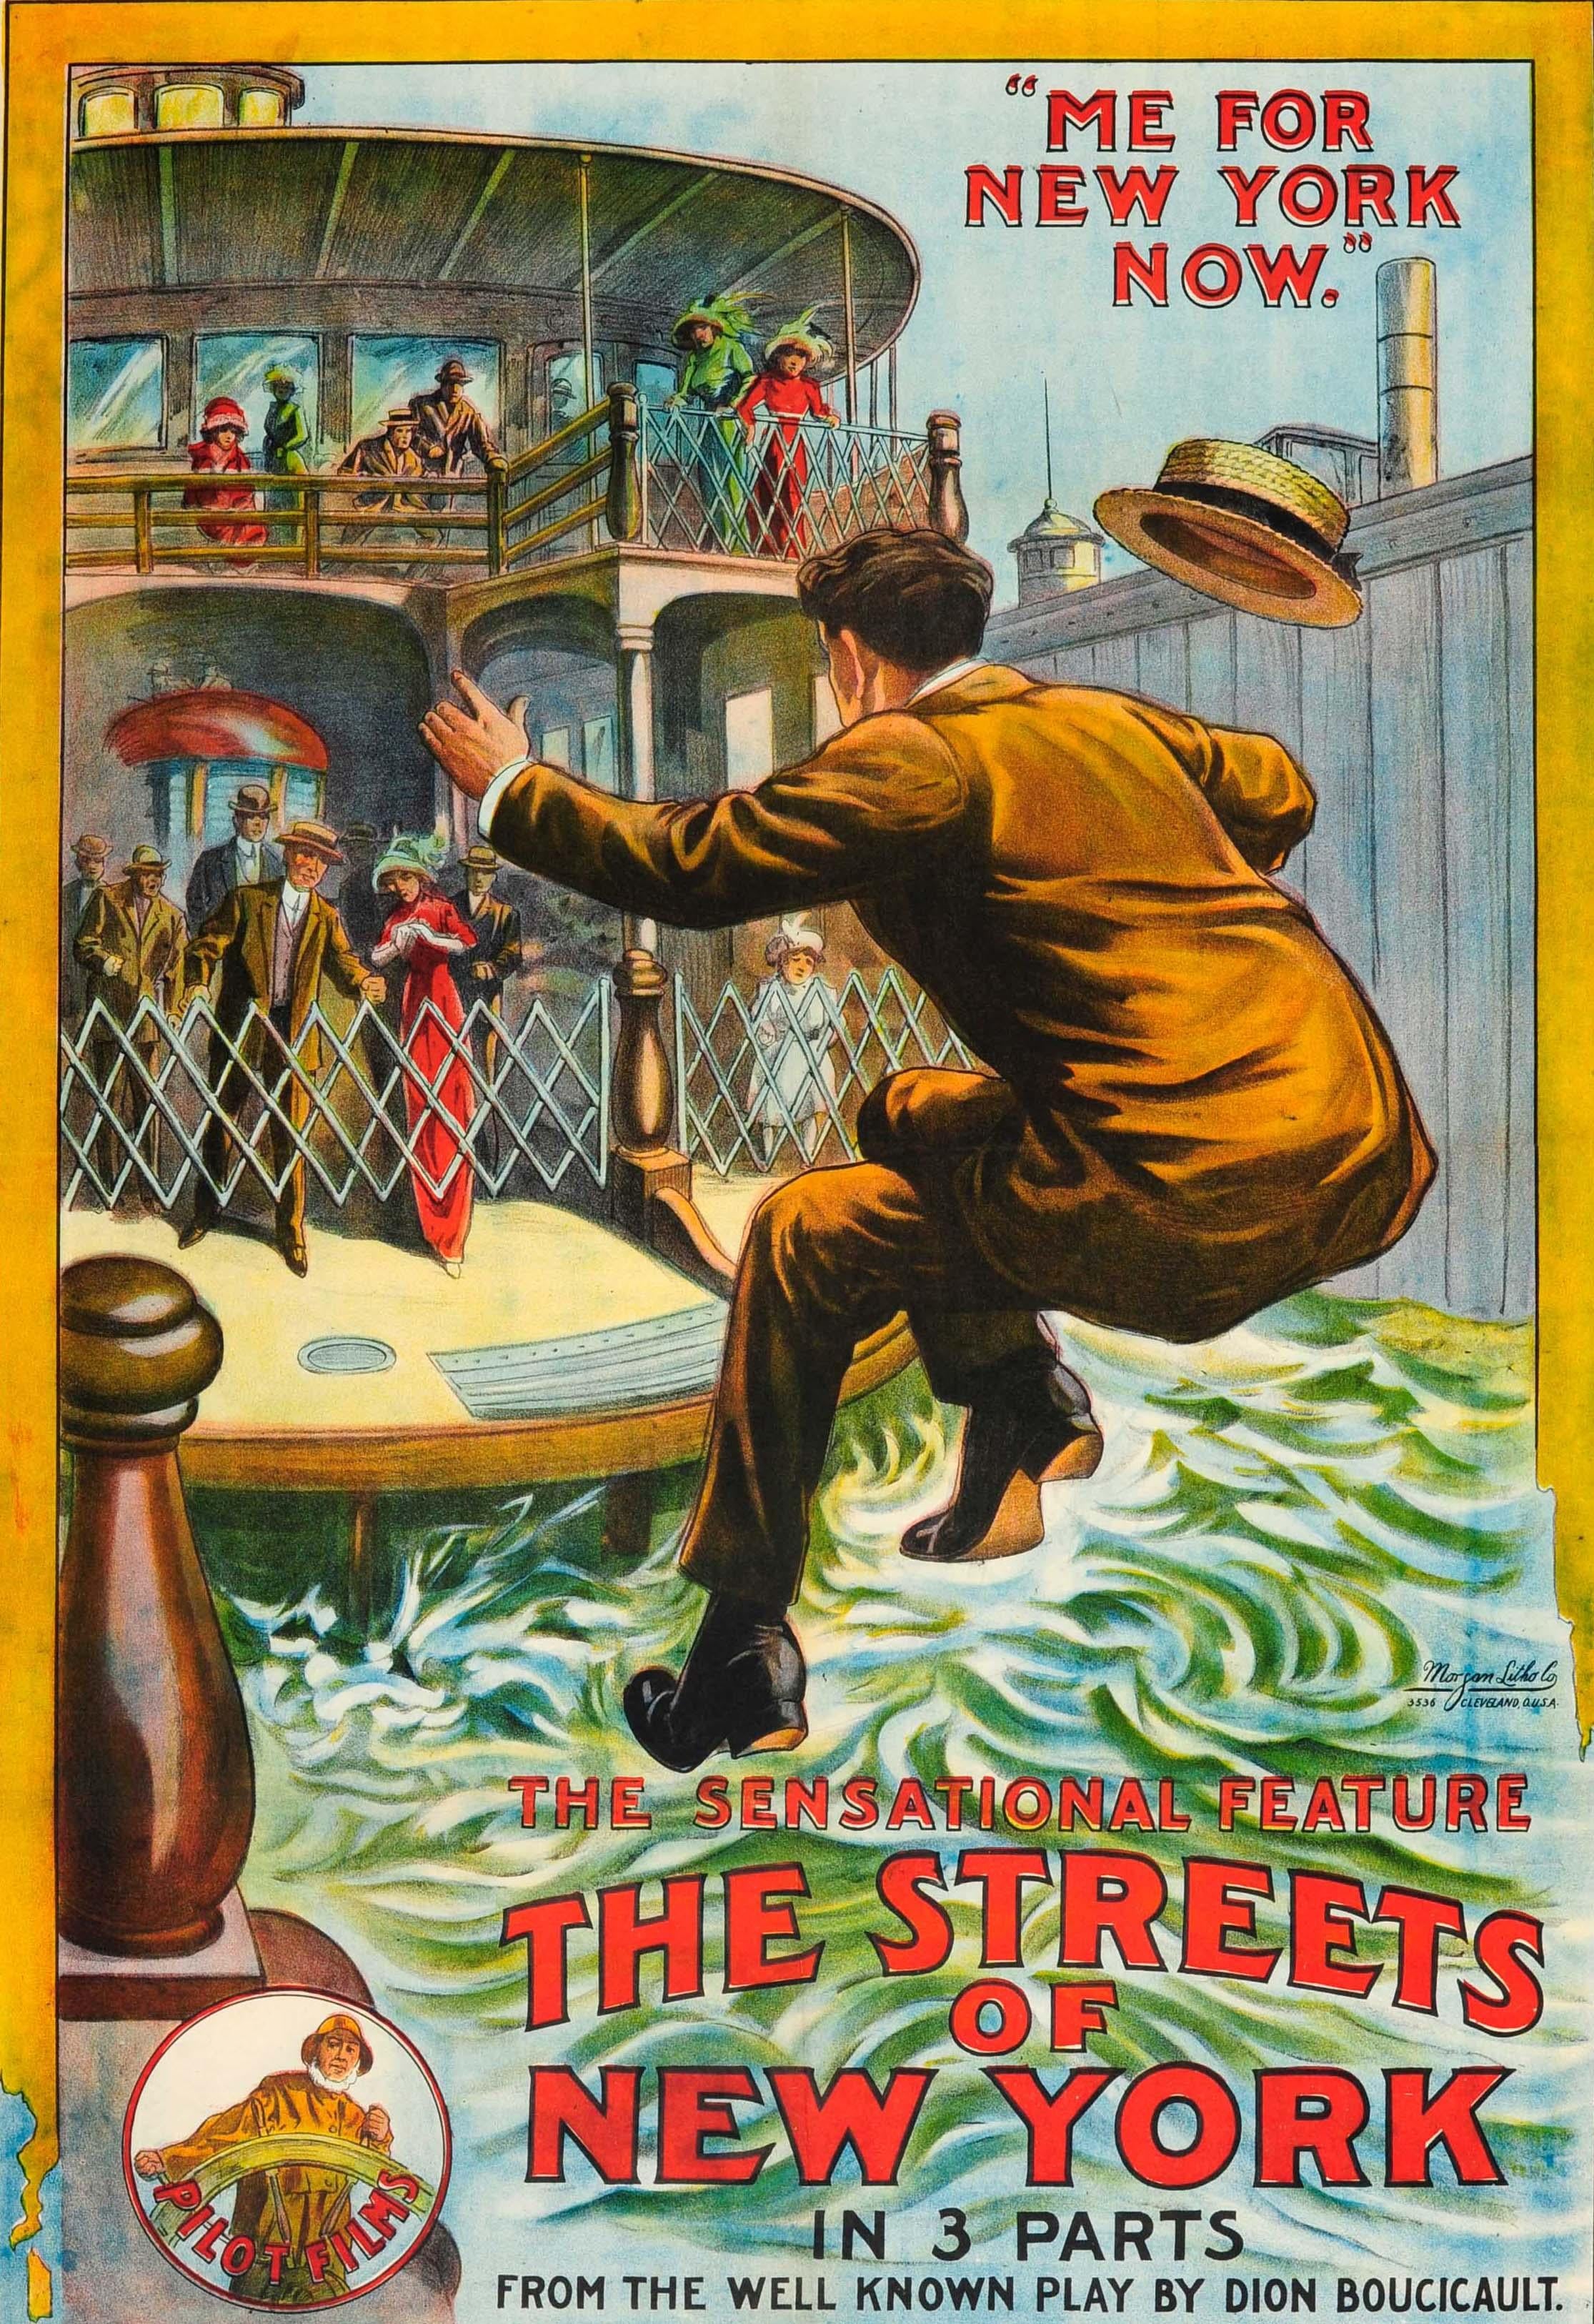 Original antique movie poster for an American comedy drama The Streets of New York - The sensational feature in 3 parts 